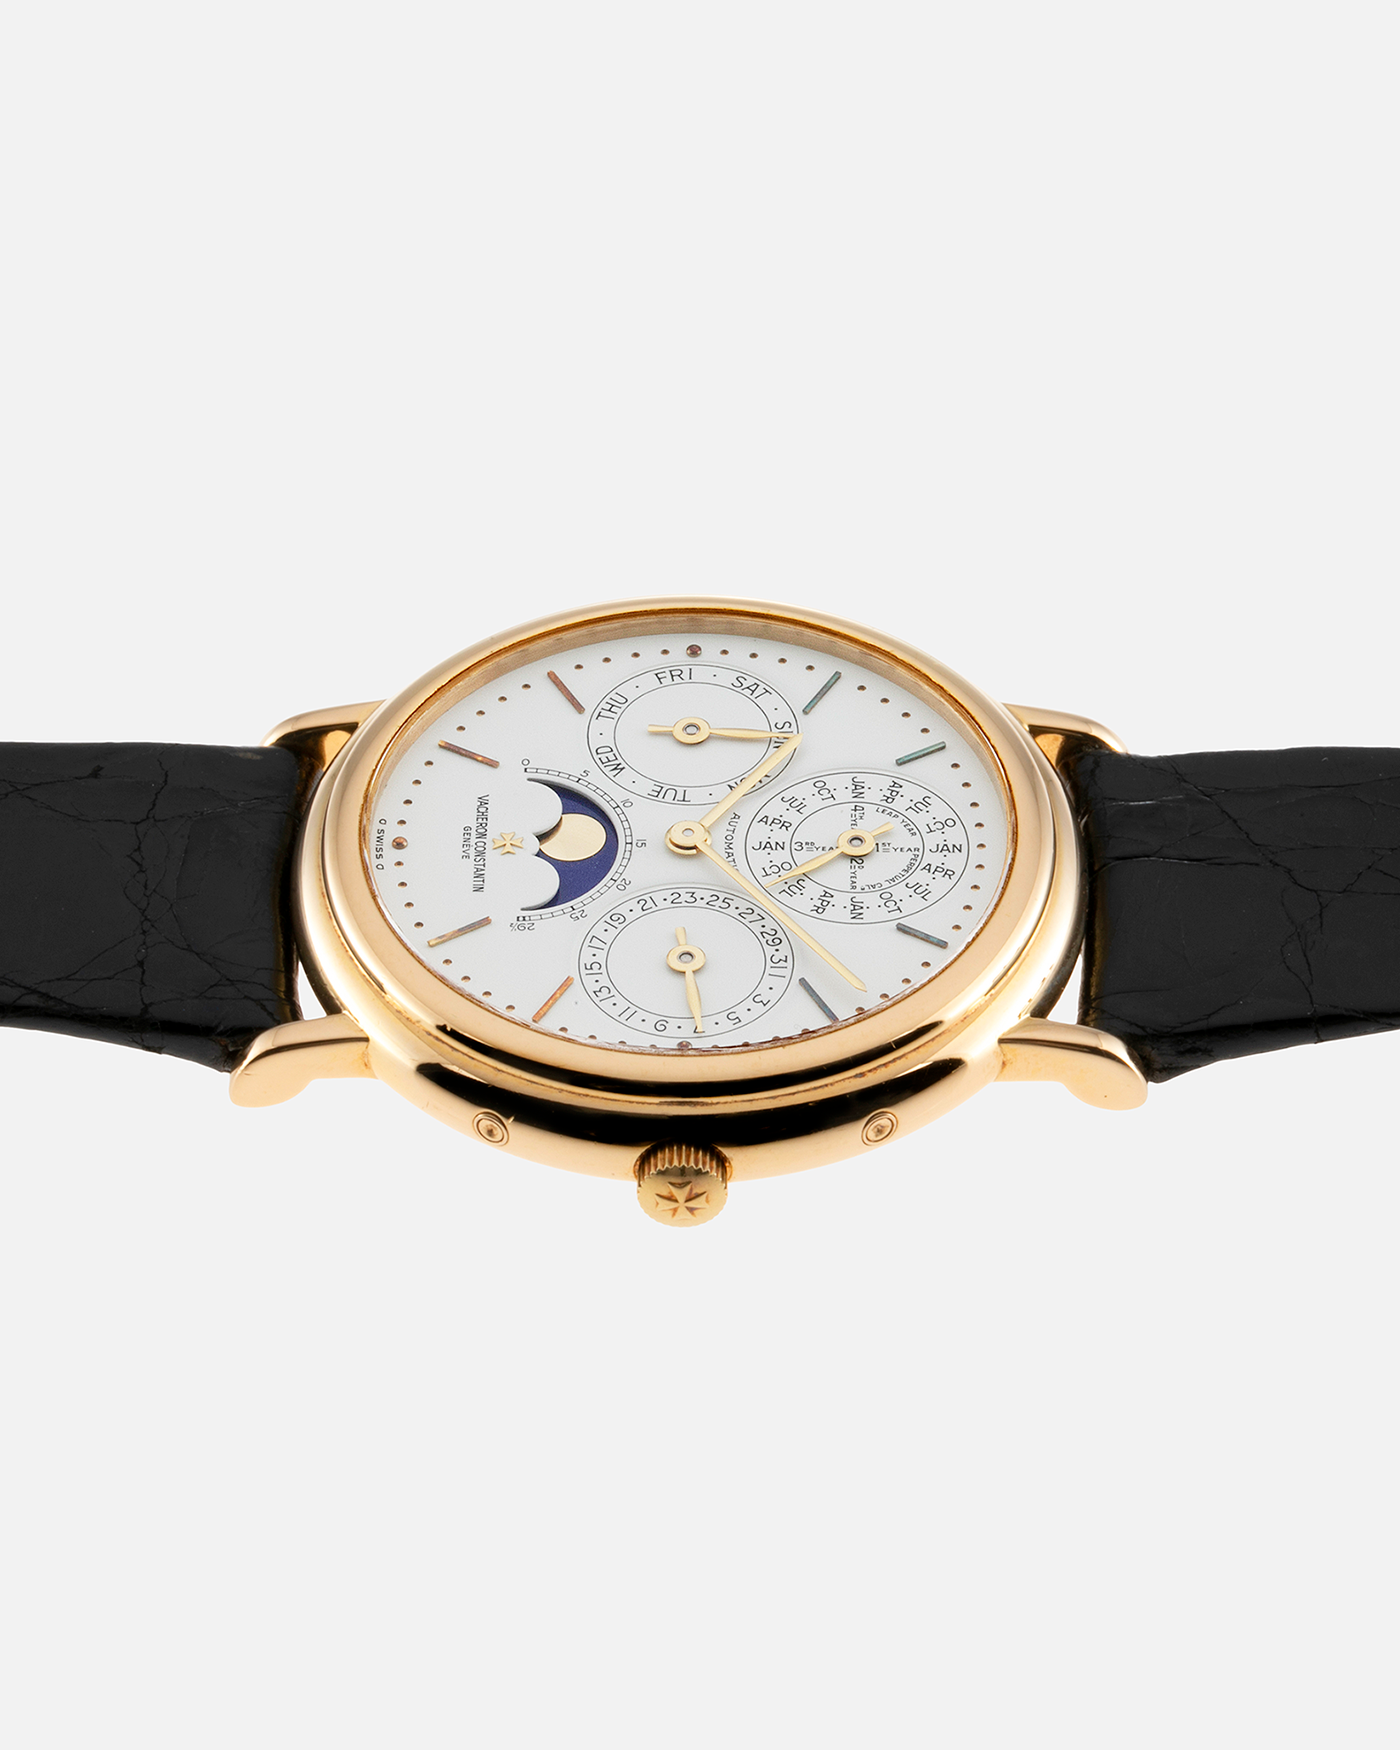 Brand: Vacheron Constantin Year: 1990’s Model: Perpetual Calendar Reference Number: 43031 Material: 18k Yellow Gold Movement: Vacheron Constantin Cal. 1120/2 Case Diameter: 36mm Strap: Black Vacheron Constantin Alligator Strap with 18k Yellow Gold Tang Buckle